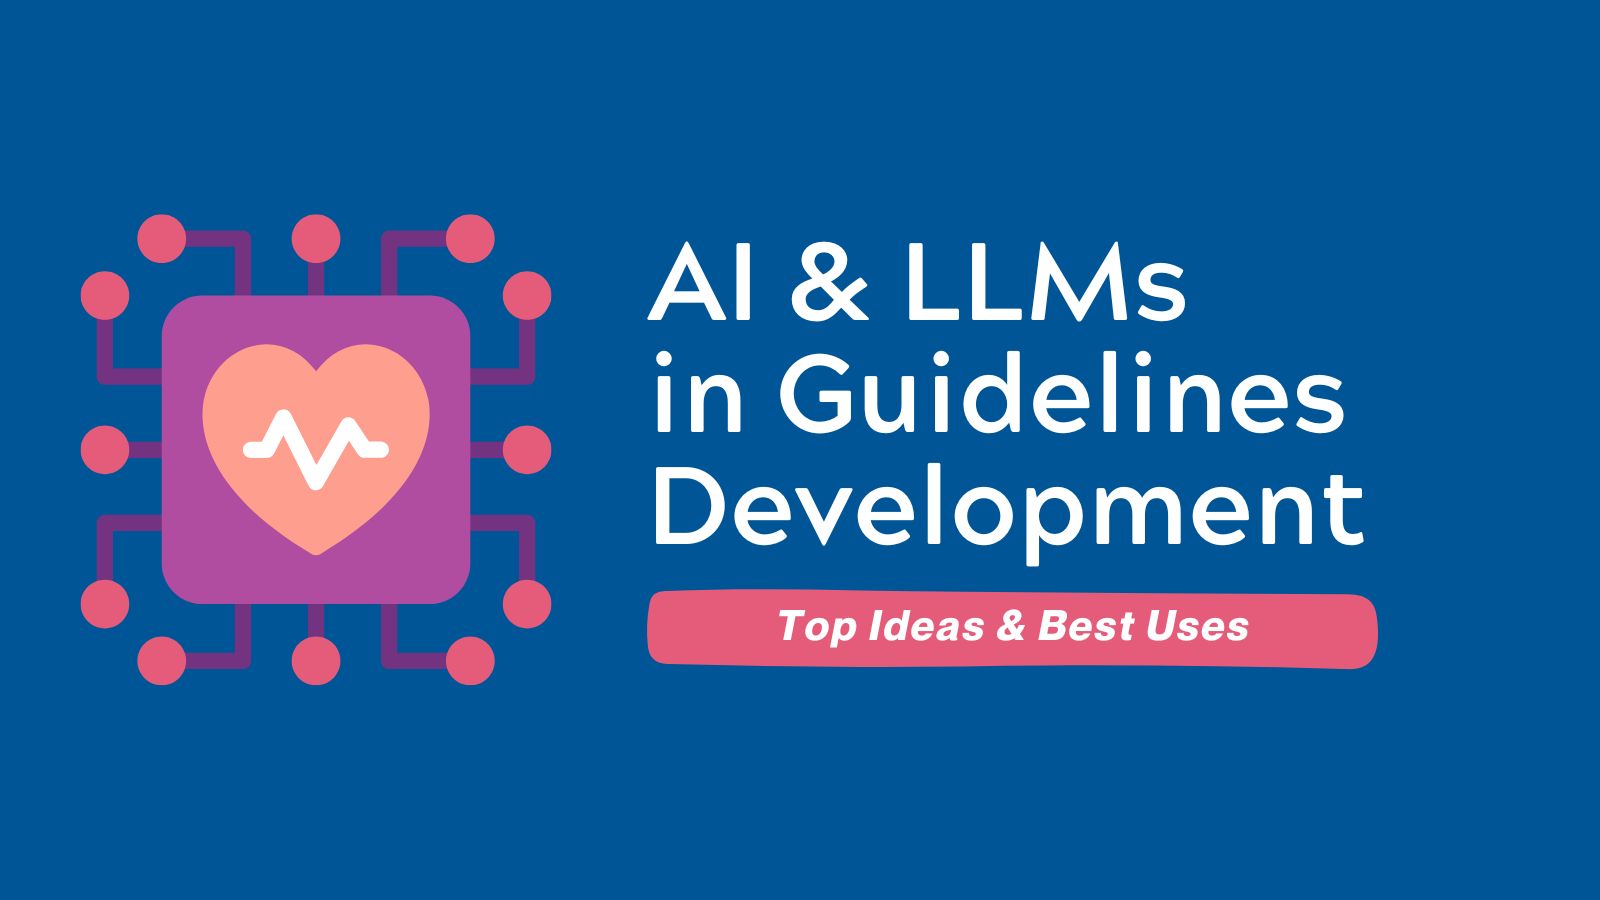 Best Uses of AI LLMs in Guidelines Development